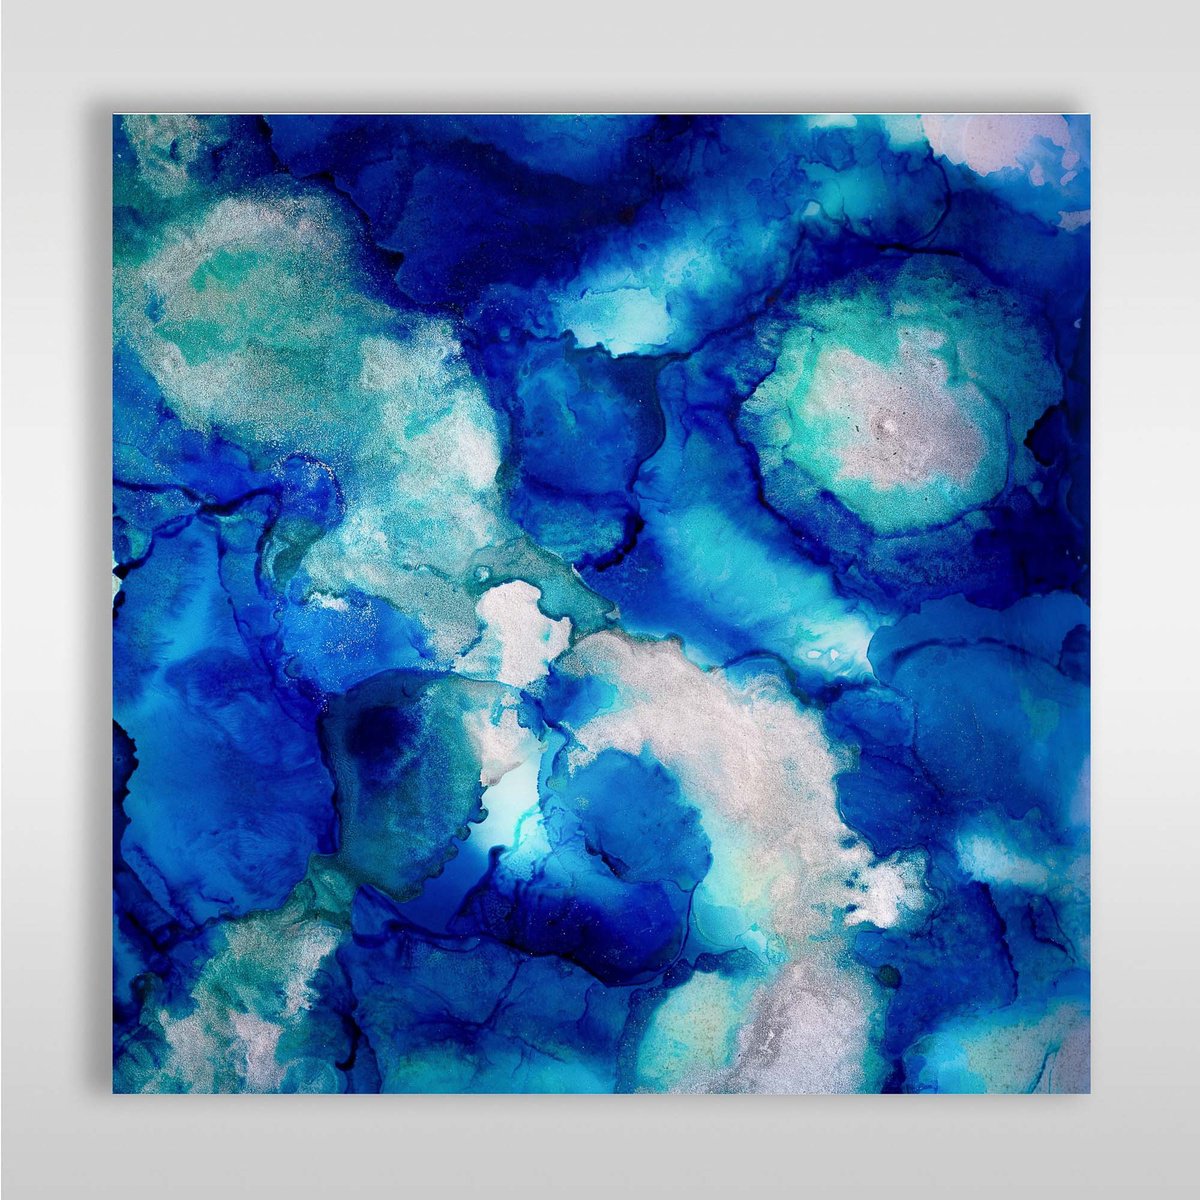 Zaffre I - ALCOHOL INK MODERN ABSTRACT FLUID PAINTING PRINT by Lynne Douglas